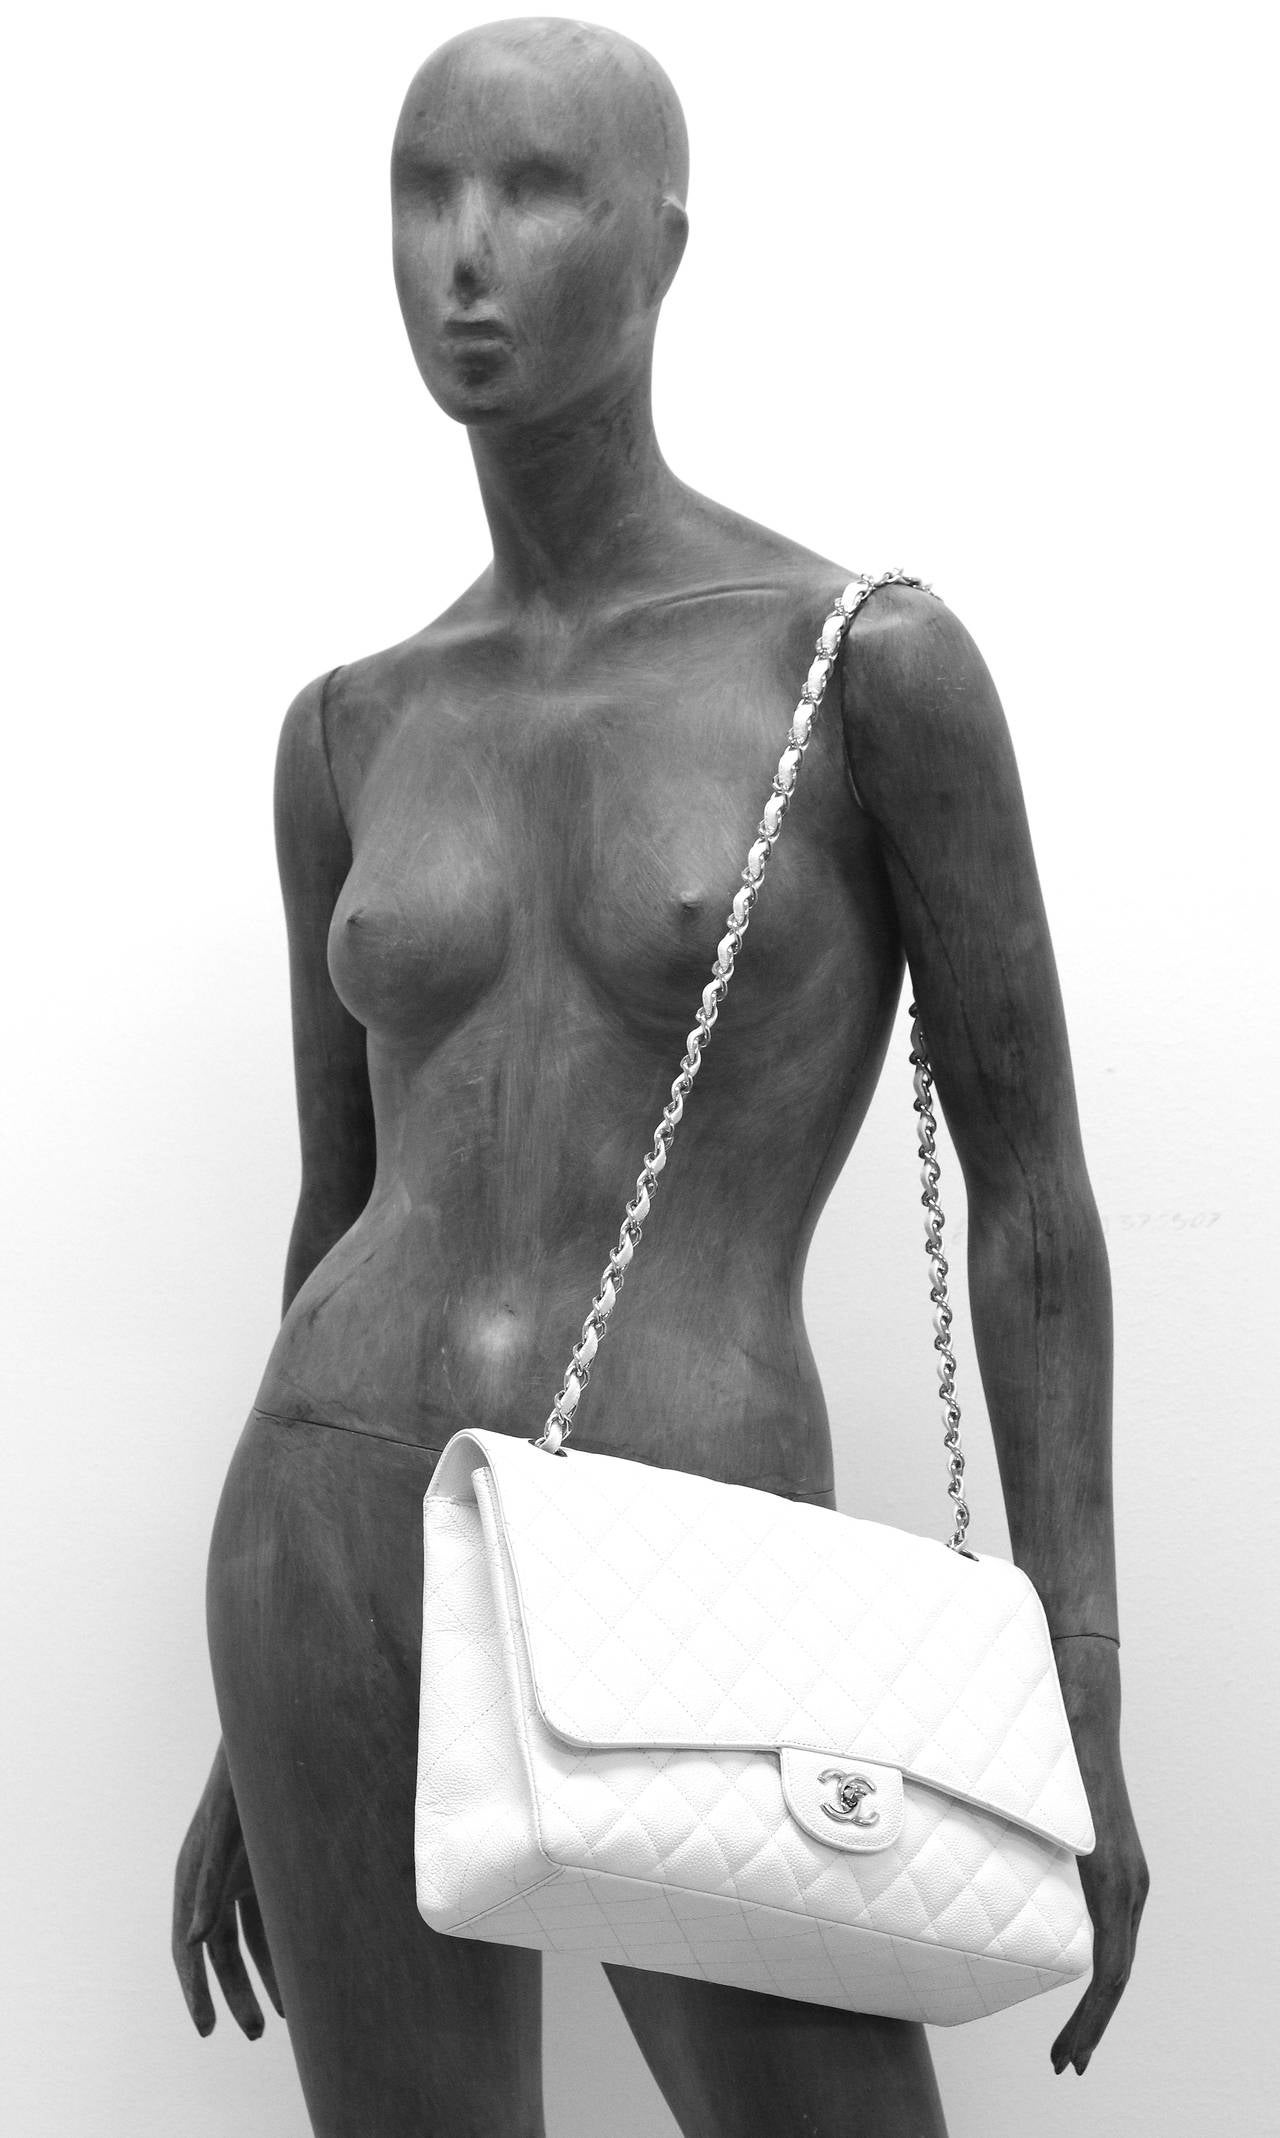 Jumbo Chanel classic flap bag in quilted white caviar leather with silver hardware. The bags woven chain can be worn as a cross body or adjusted to be a shoulder bag.

Comes with authenticity card. 

From the year 2010

The bag is in amazing